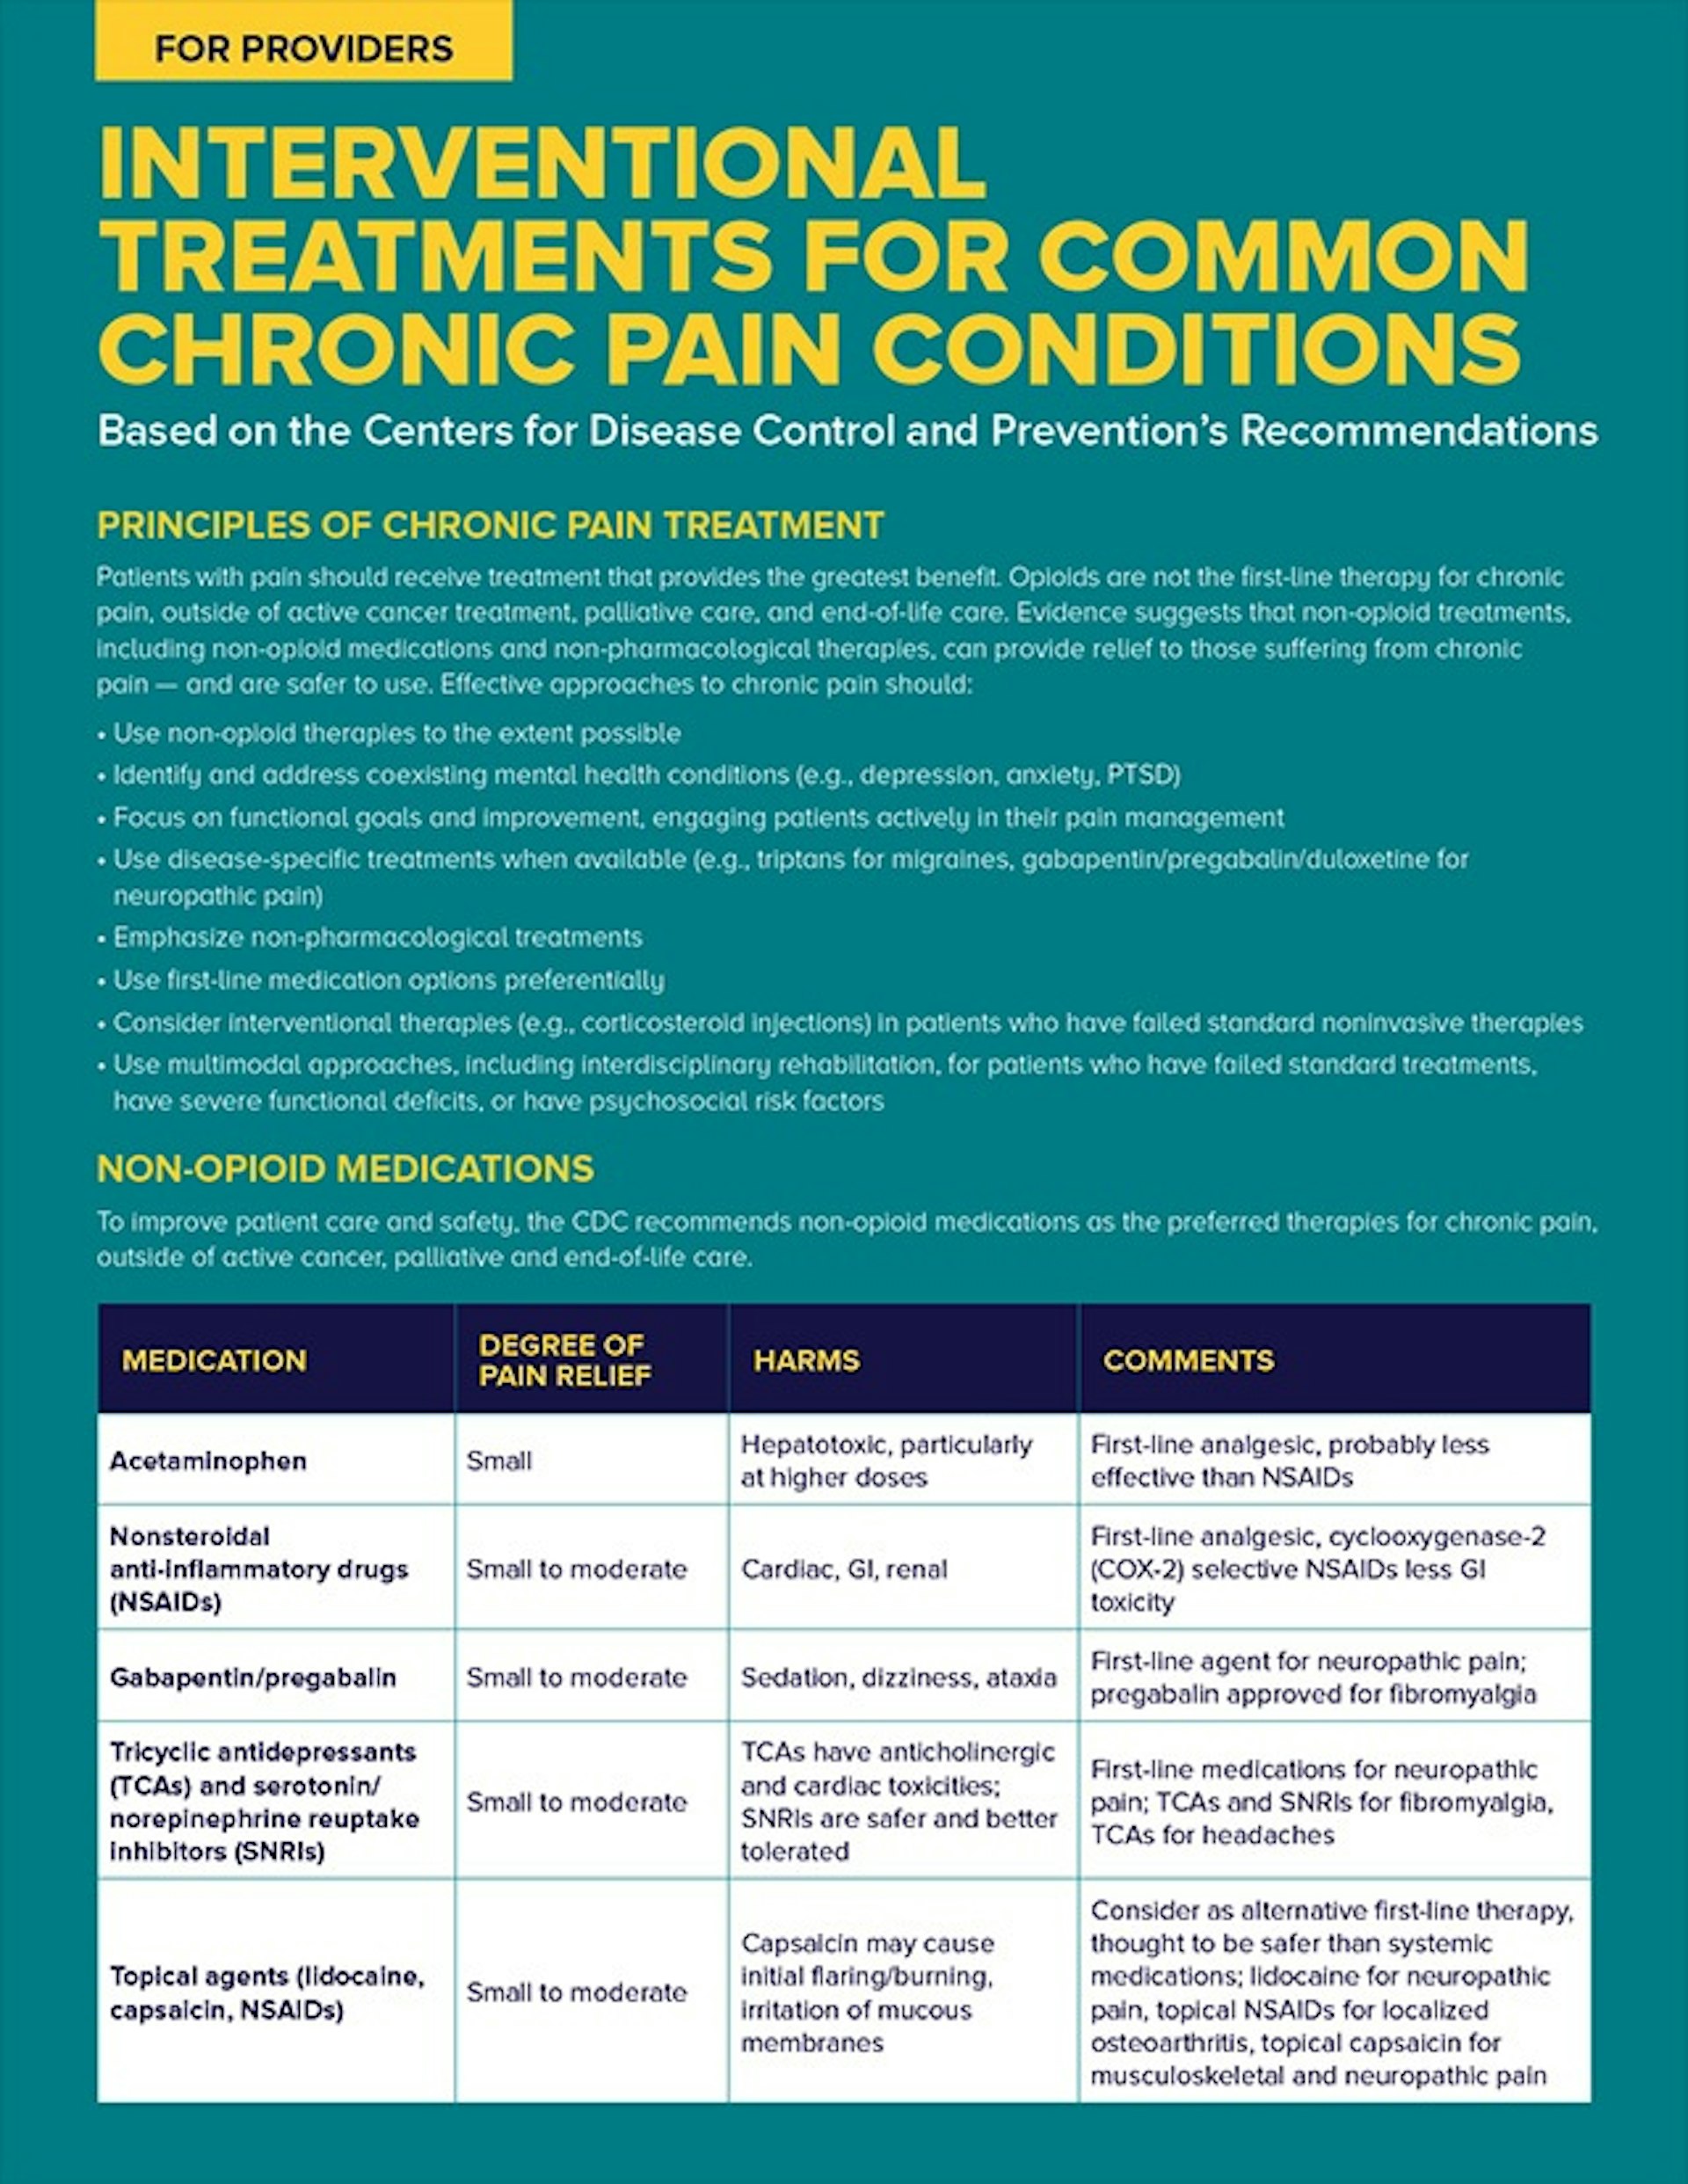 Interventional Treatments for Common Chronic Pain Conditions